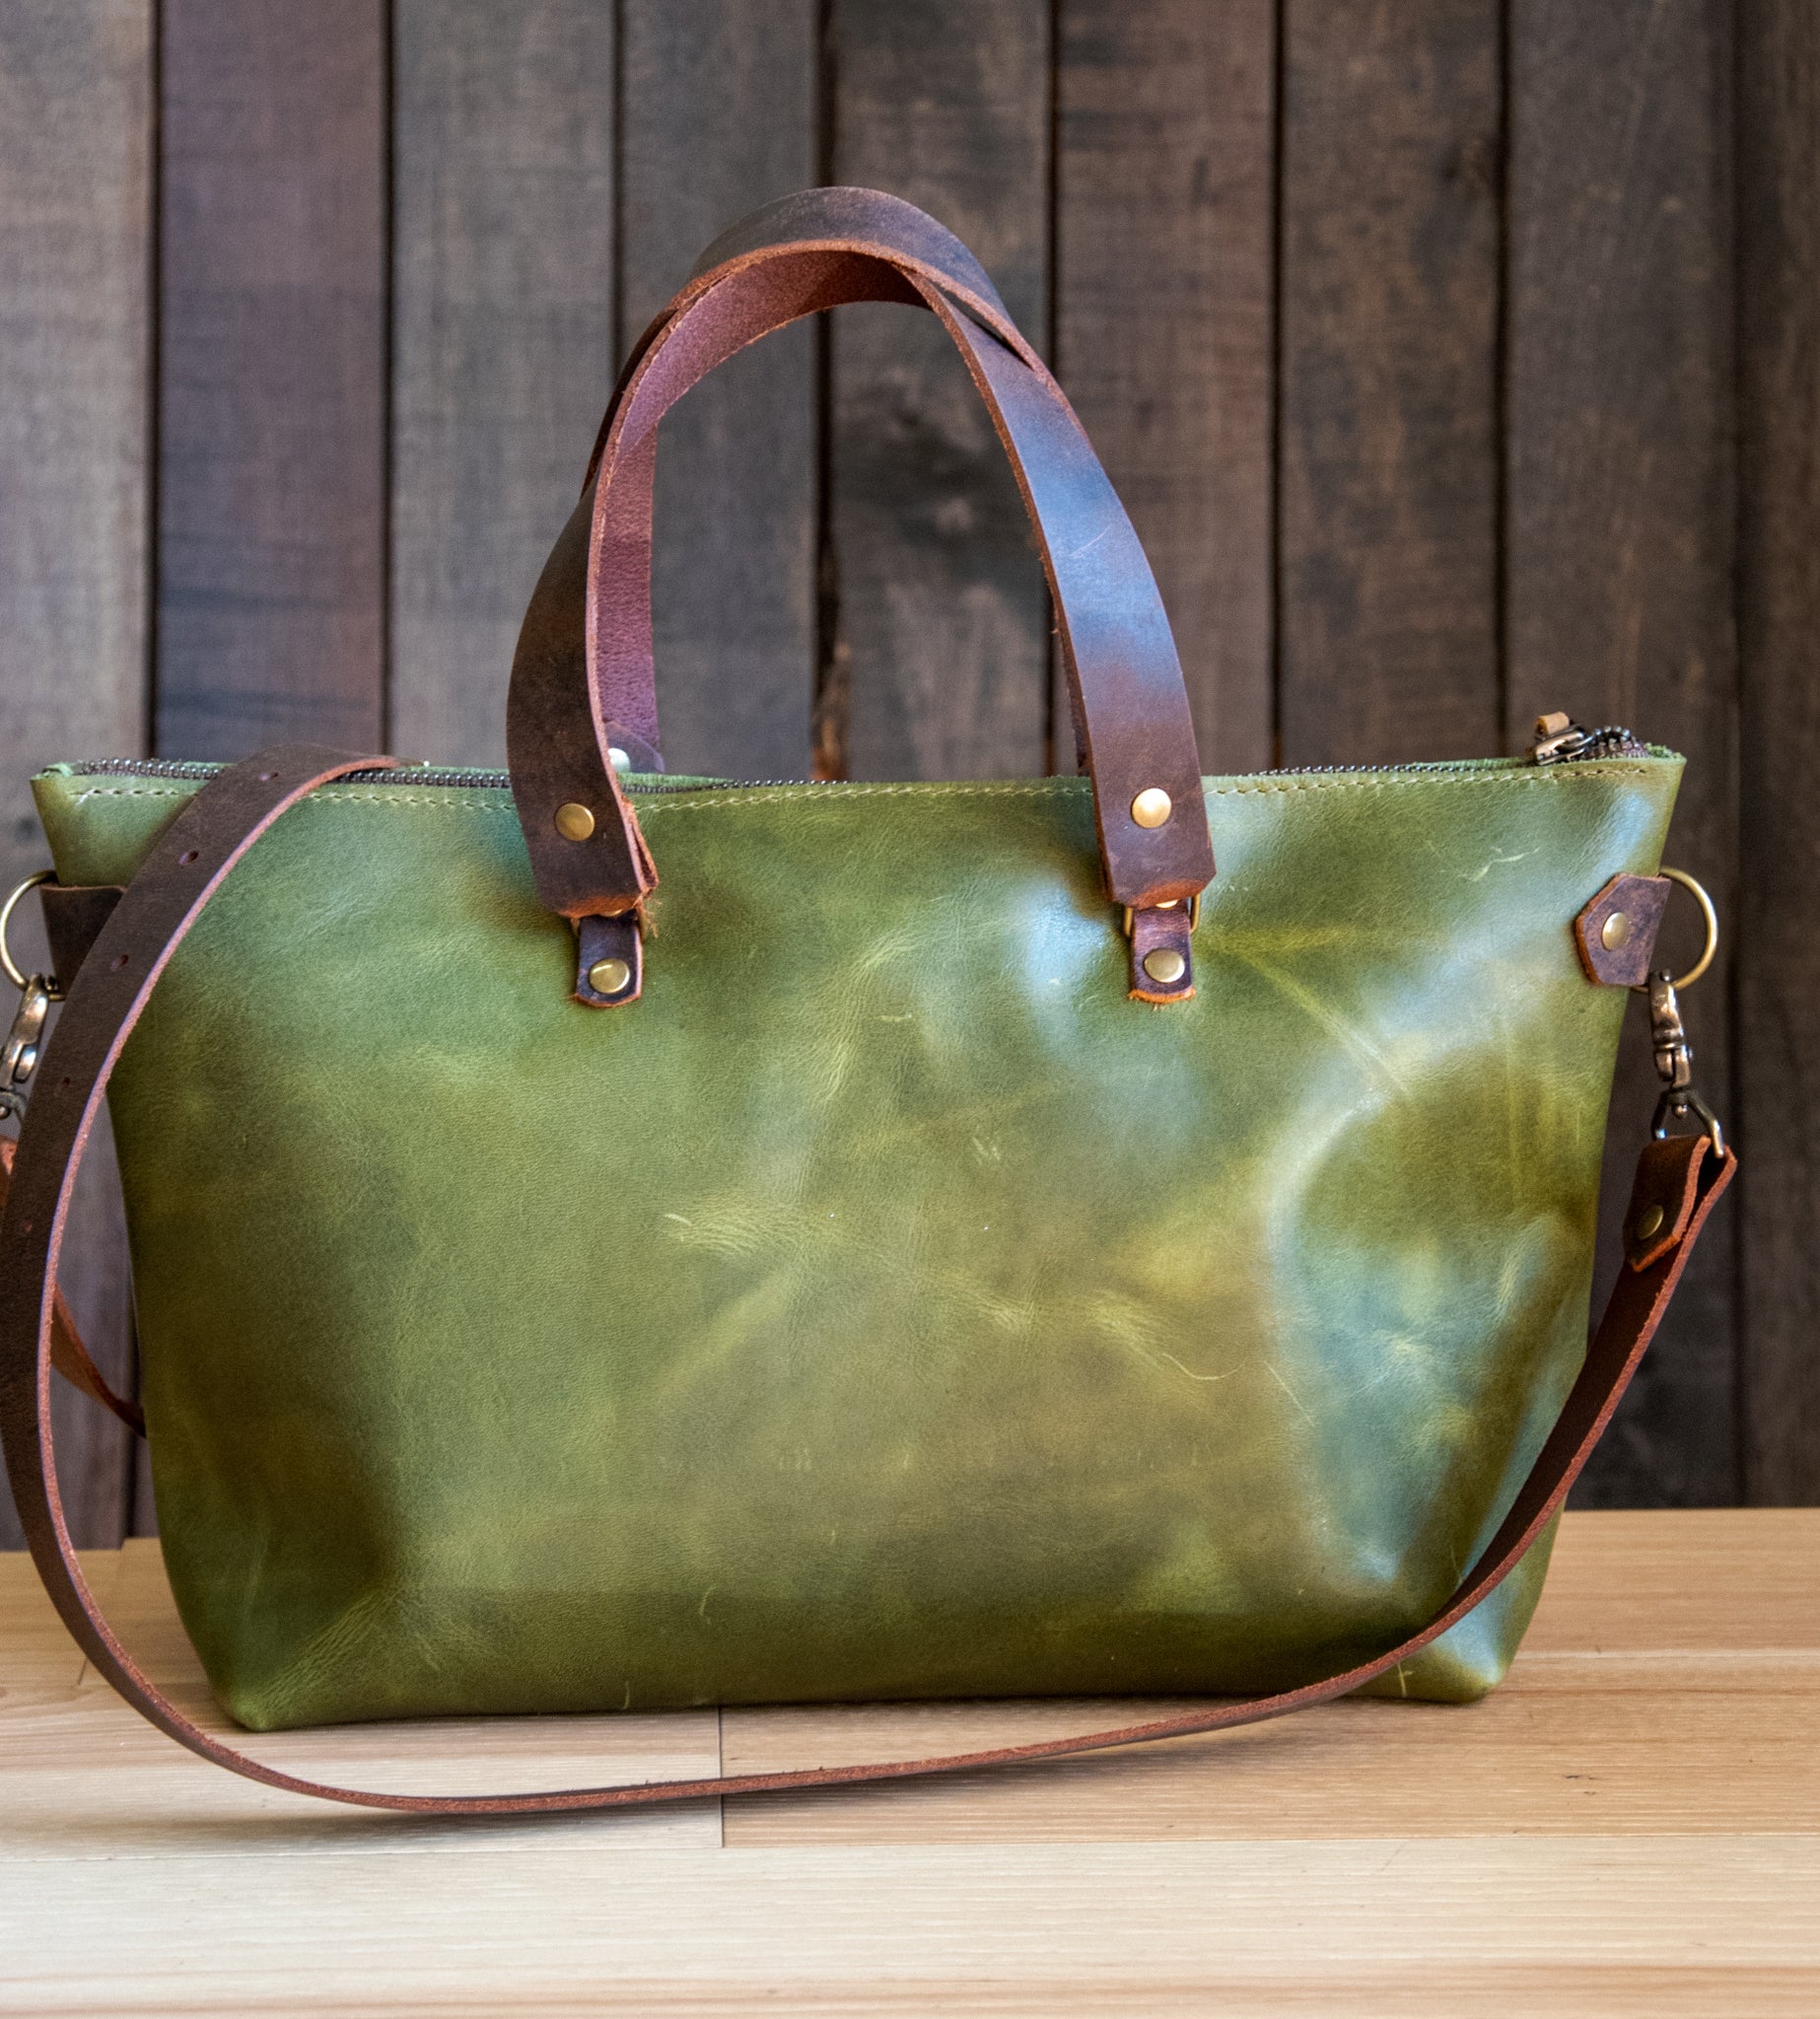 Handmade Leather Purse | Eco Friendly Leather Tote Bag | The Bowler Bag | Small to Medium